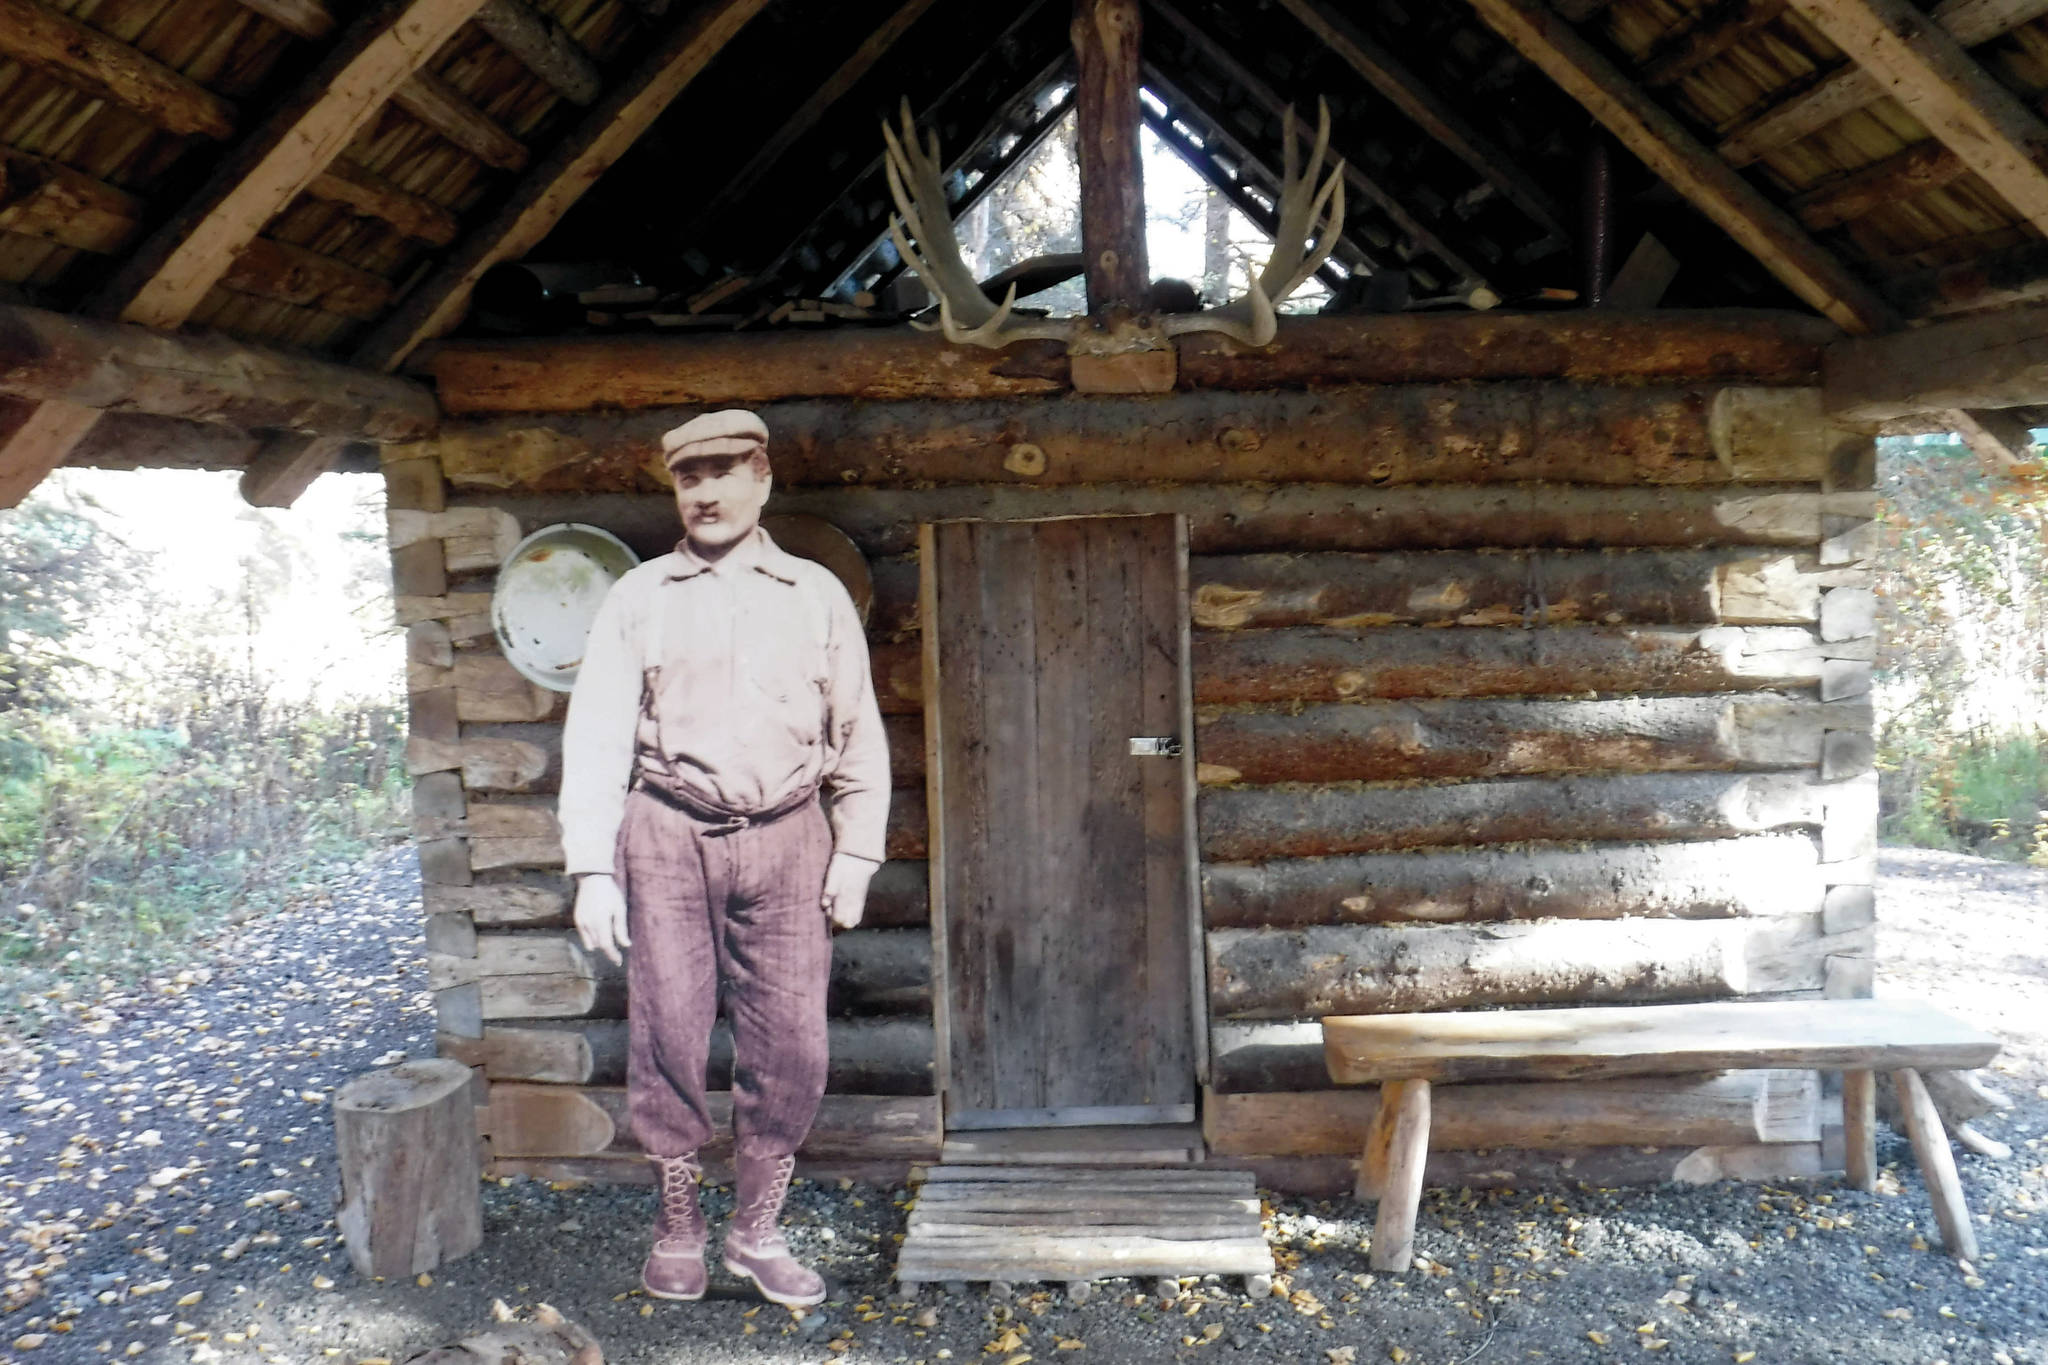 Andrew Berg outside his ҈omesteadӠcabin, which stood originally on Tustumena Lake and now stands at the headquarters of Kenai National Wildlife Refuge. (Photo provided by Kenai National Wildlife Refuge)